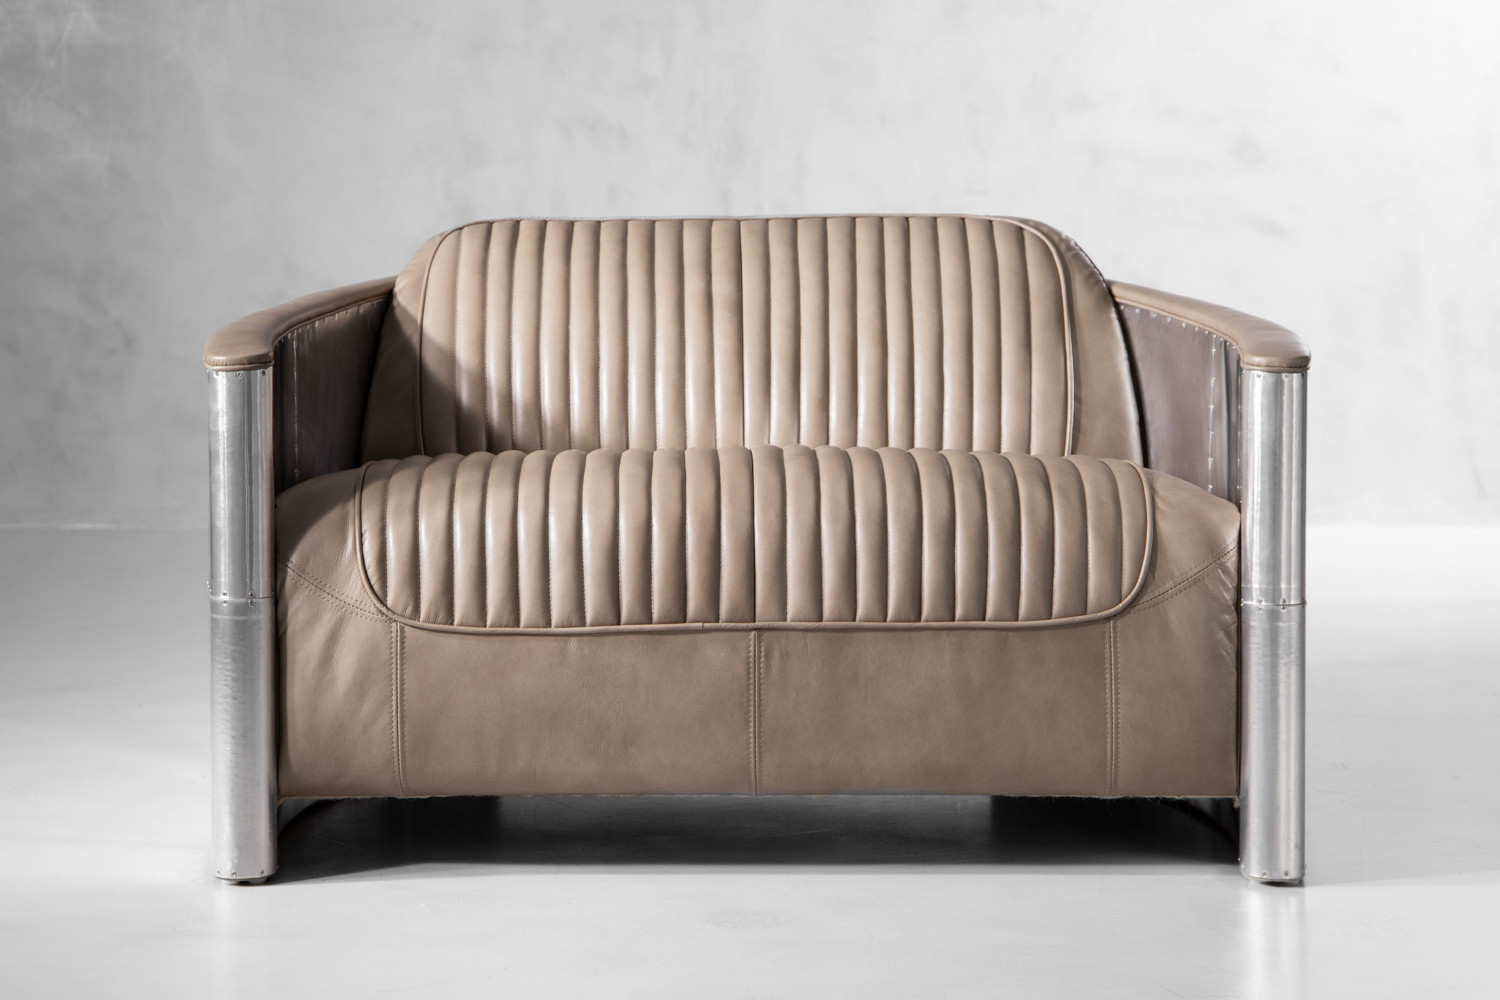 Spitfire 2 Seater Leather Couch - Smoke 2 Seater Couches - 1